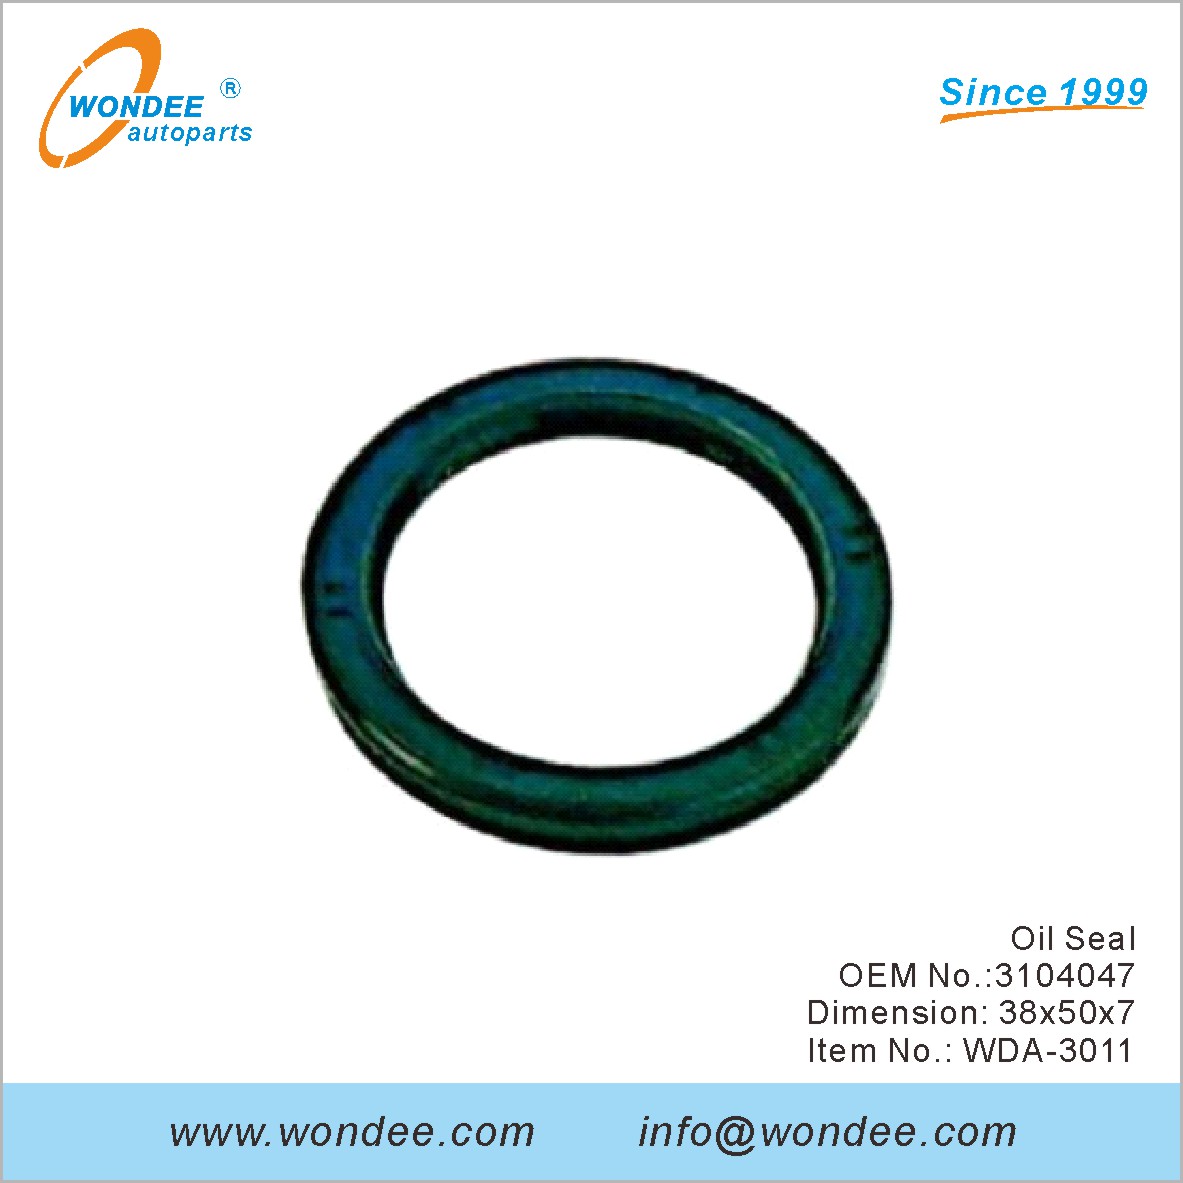 Oil Seal OEM 3104047 for DAF from WONDEE